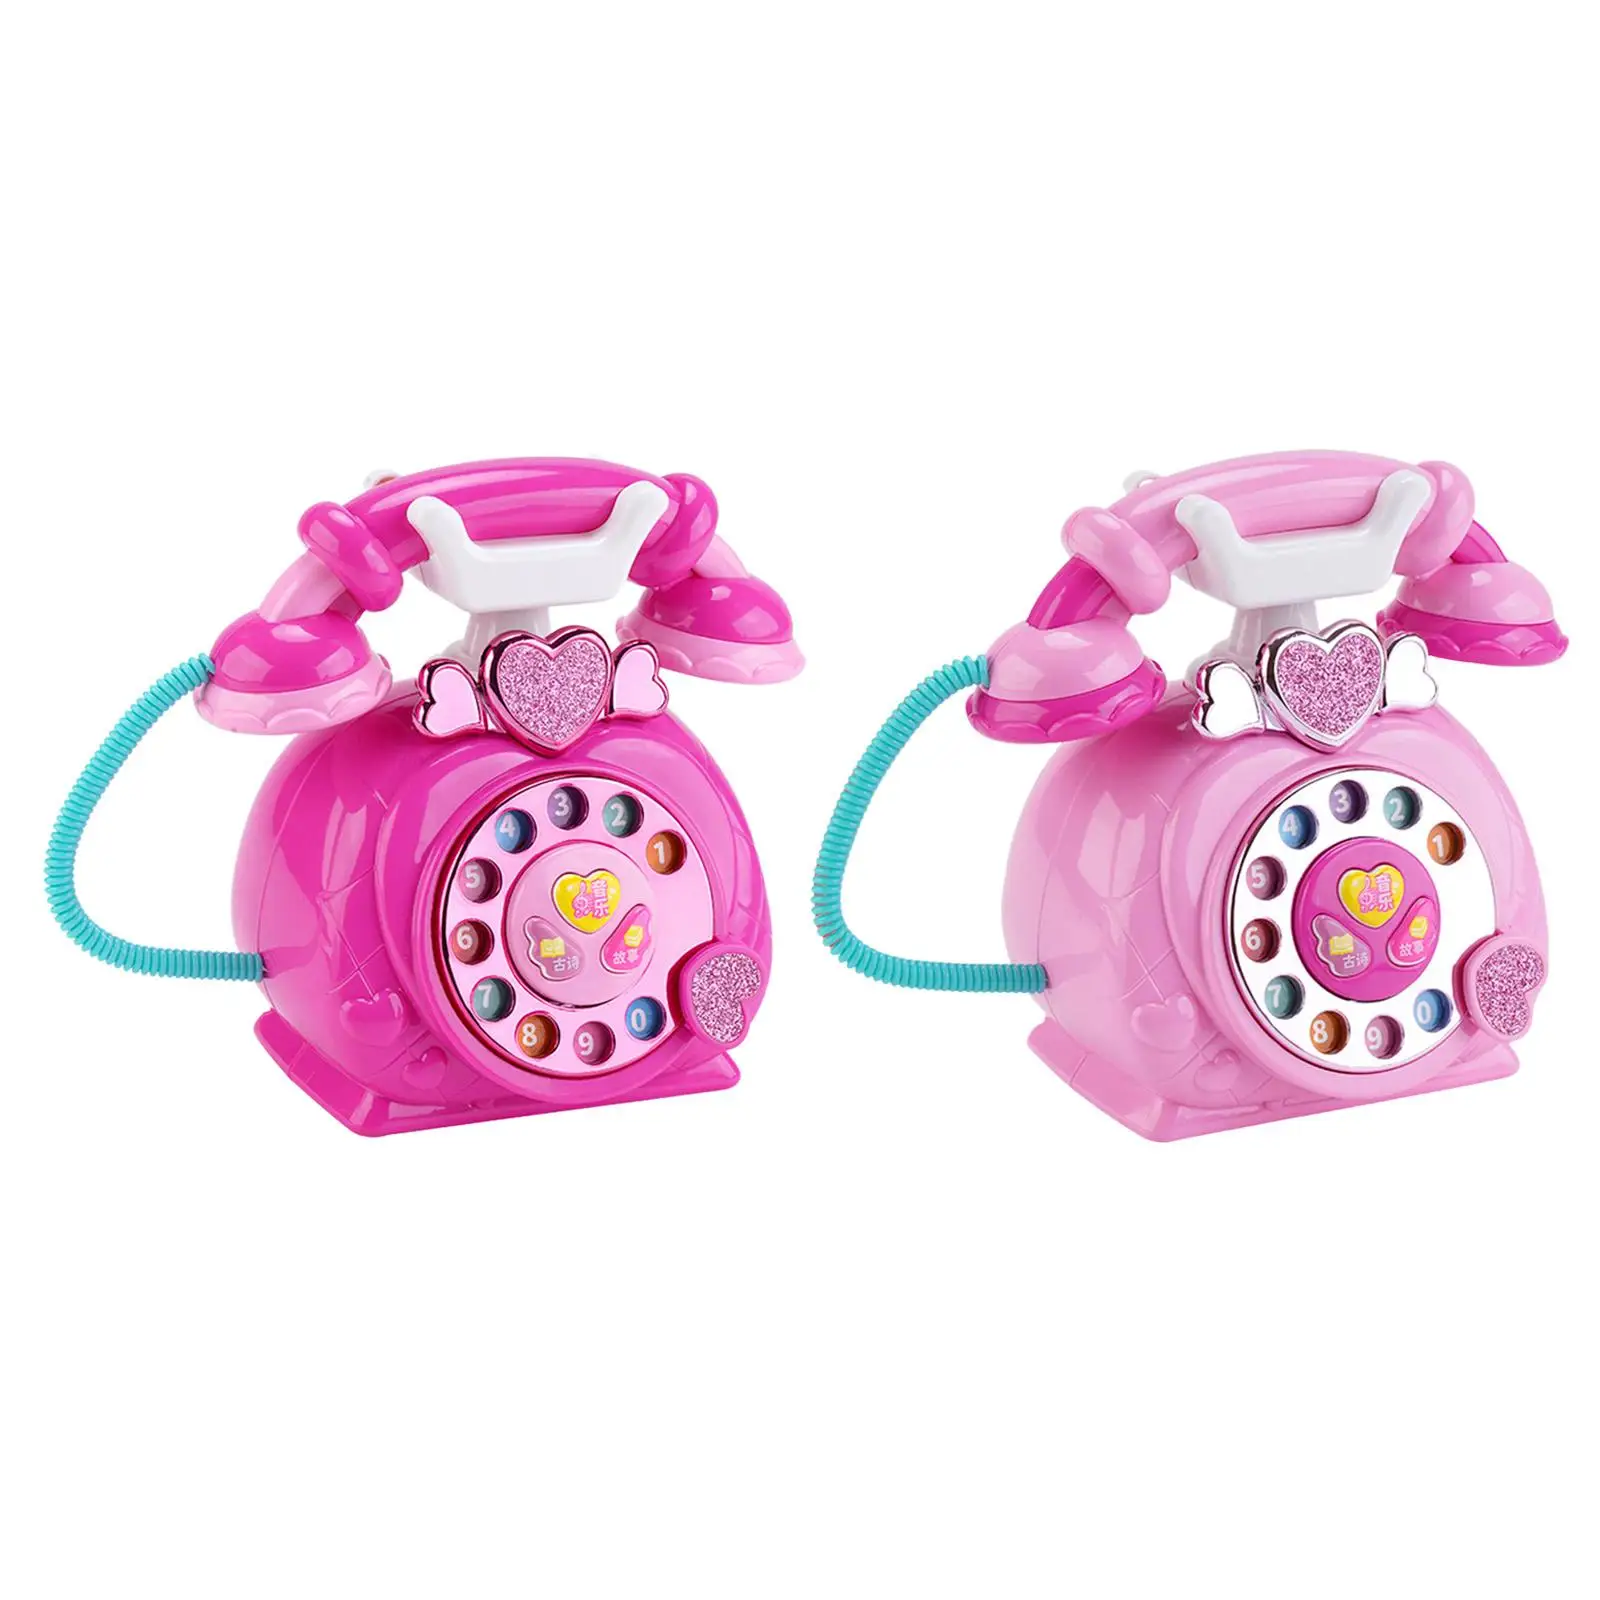 Telephone Toy Storytelling Machine Chinese English Bilingual Early Education with with Light Phone Toy for Children Toddlers